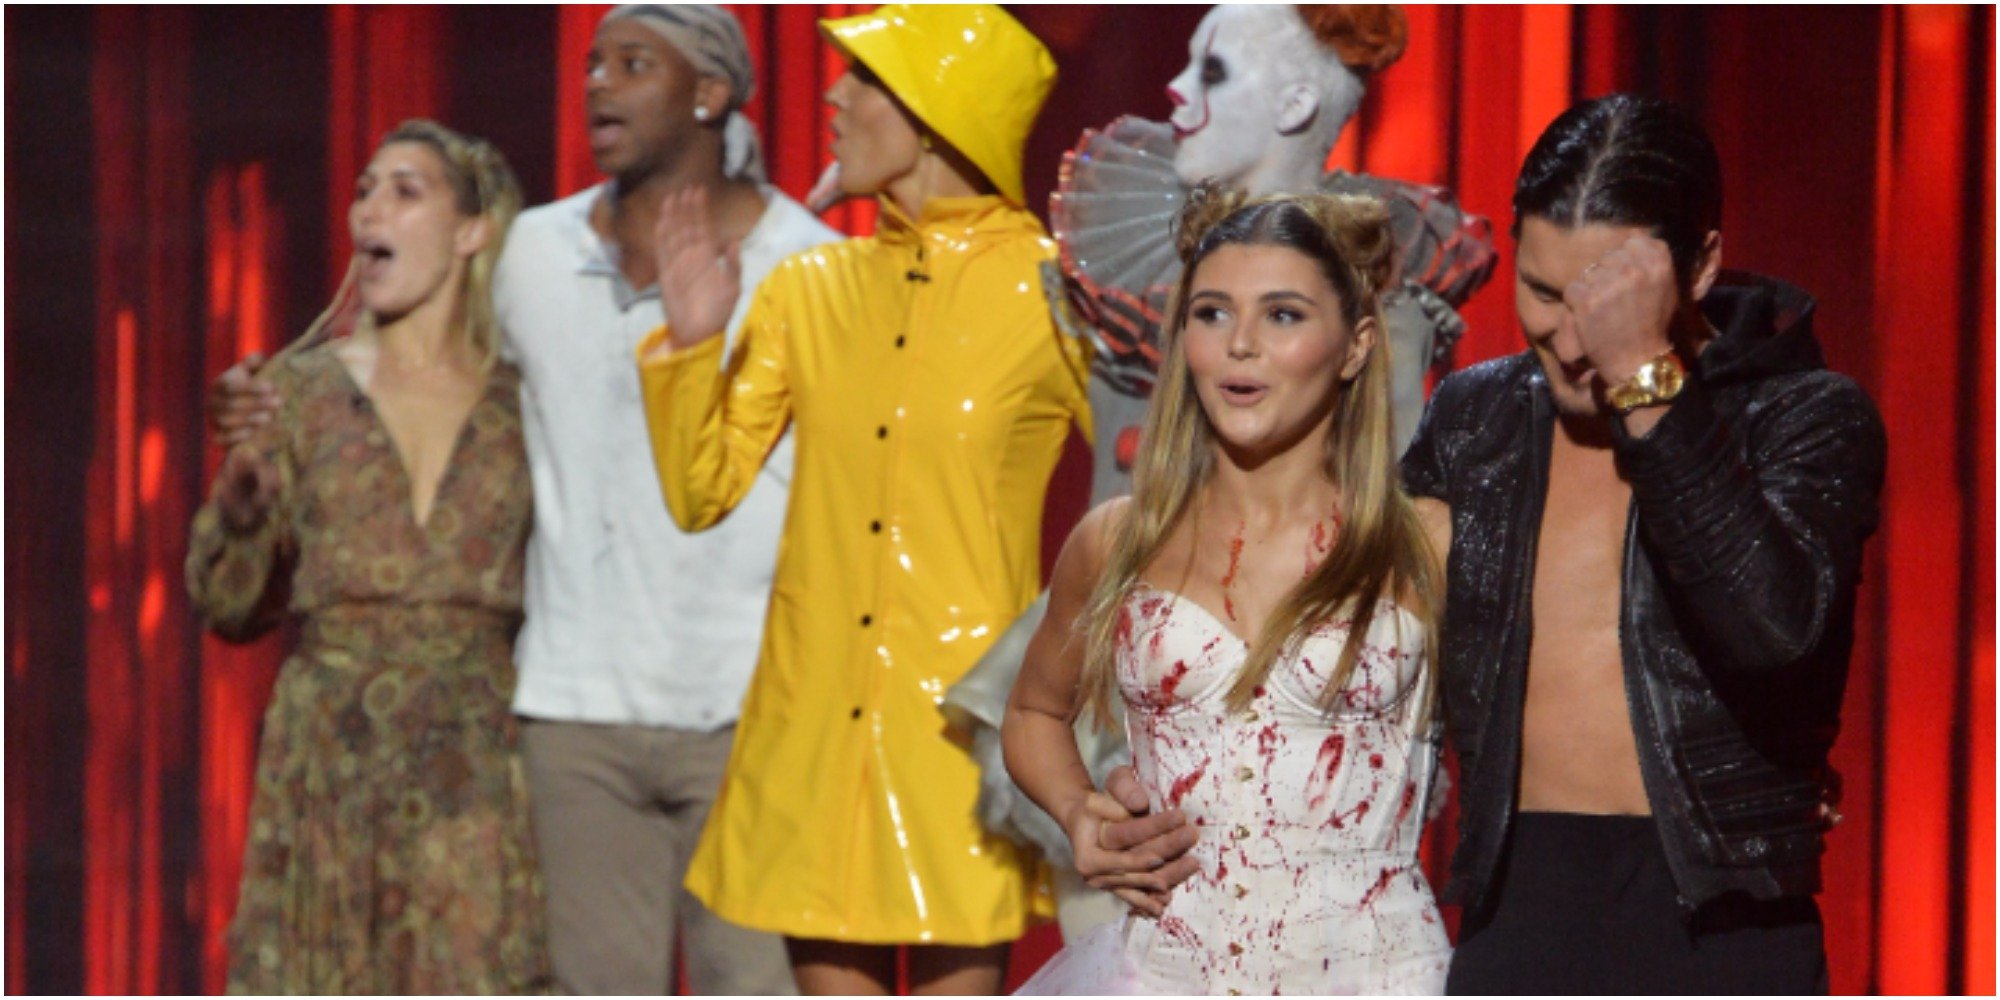 Olivia Jade, pro partner Val Chmerkovskiy and other members of the "DWTS" cast pose in the ballroom.